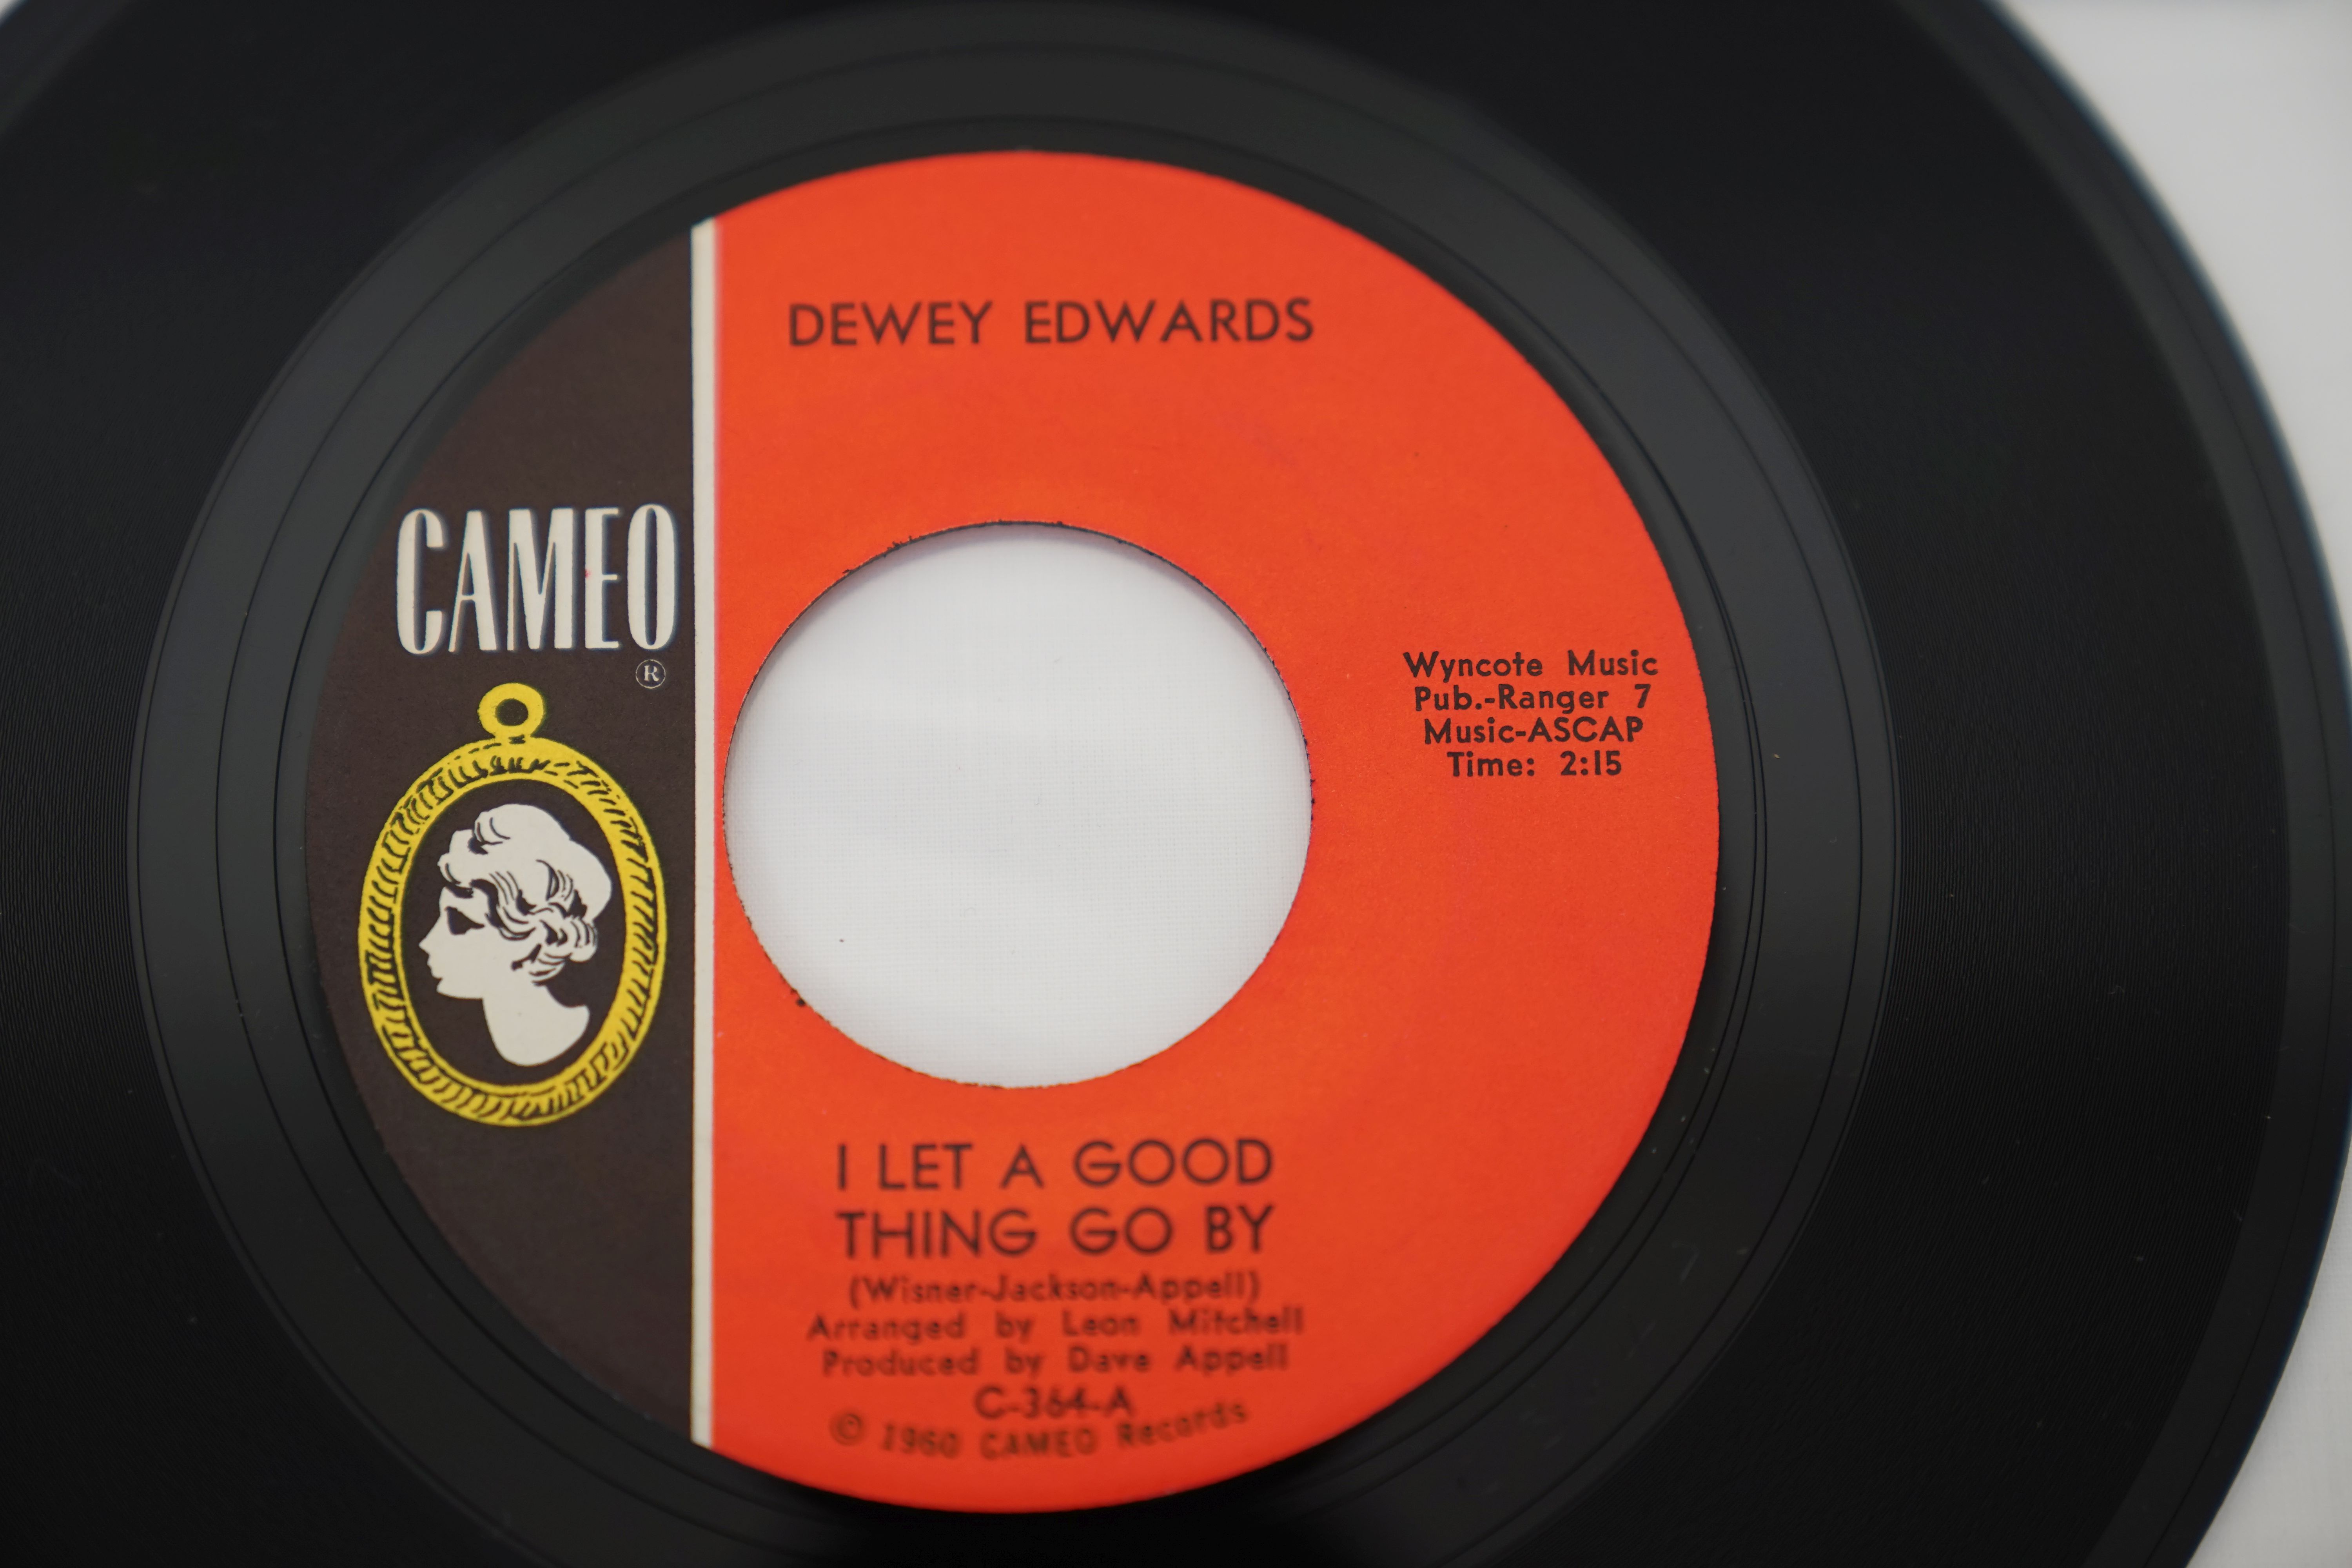 Vinyl - 3 rare Original US 1st pressing Northern Soul single on the Cameo Parkway label. The Sweet - Image 12 of 17